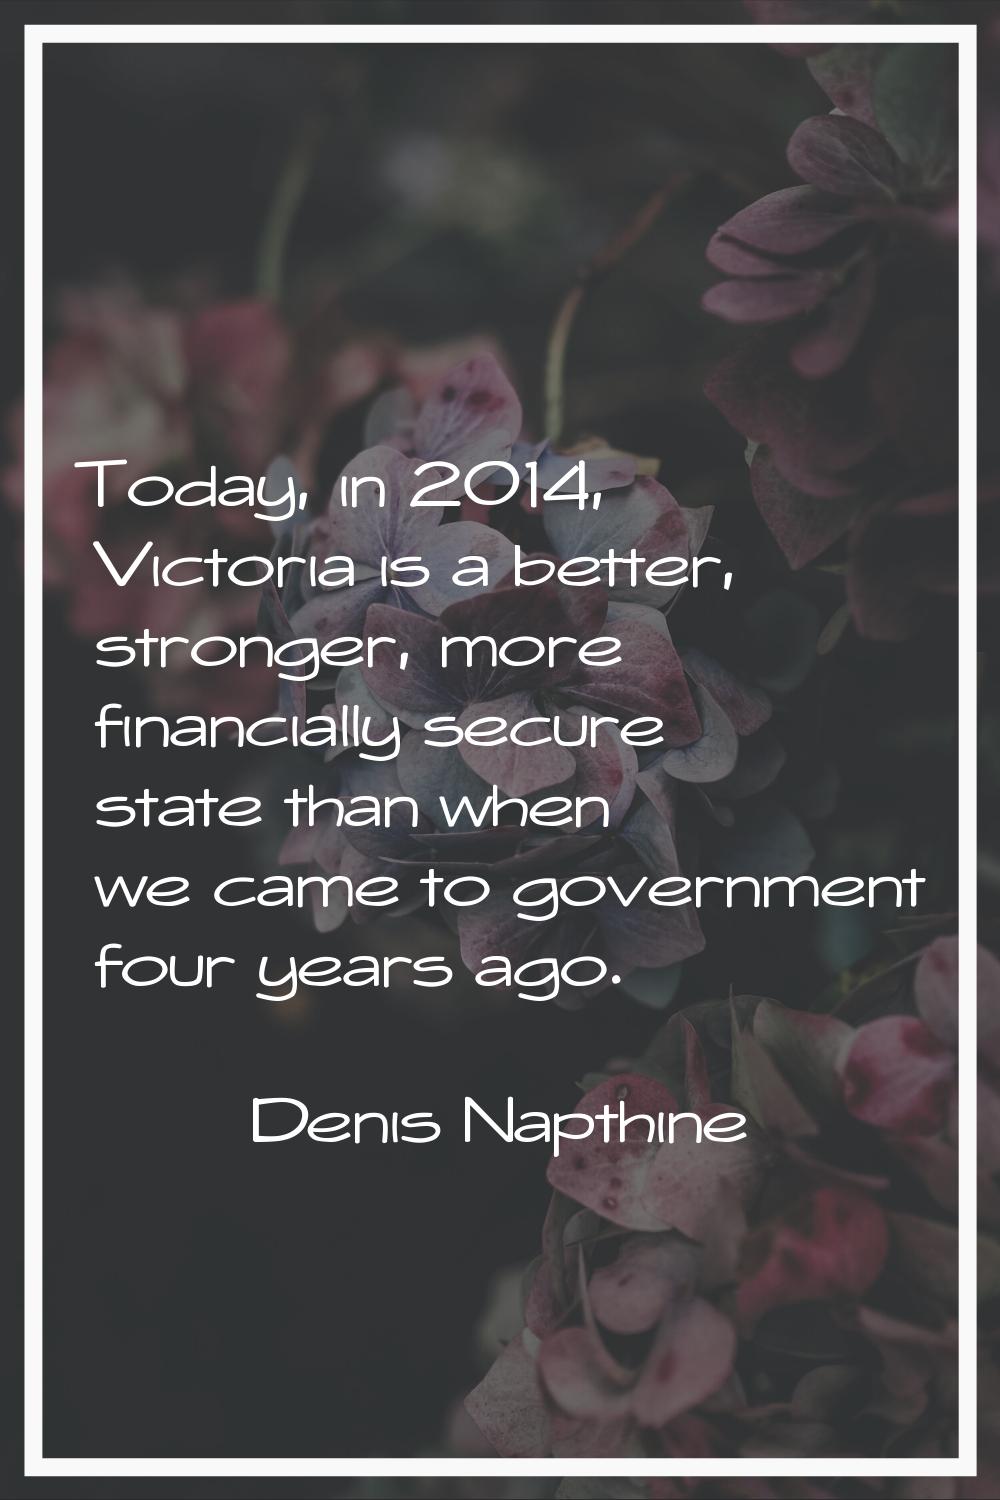 Today, in 2014, Victoria is a better, stronger, more financially secure state than when we came to 